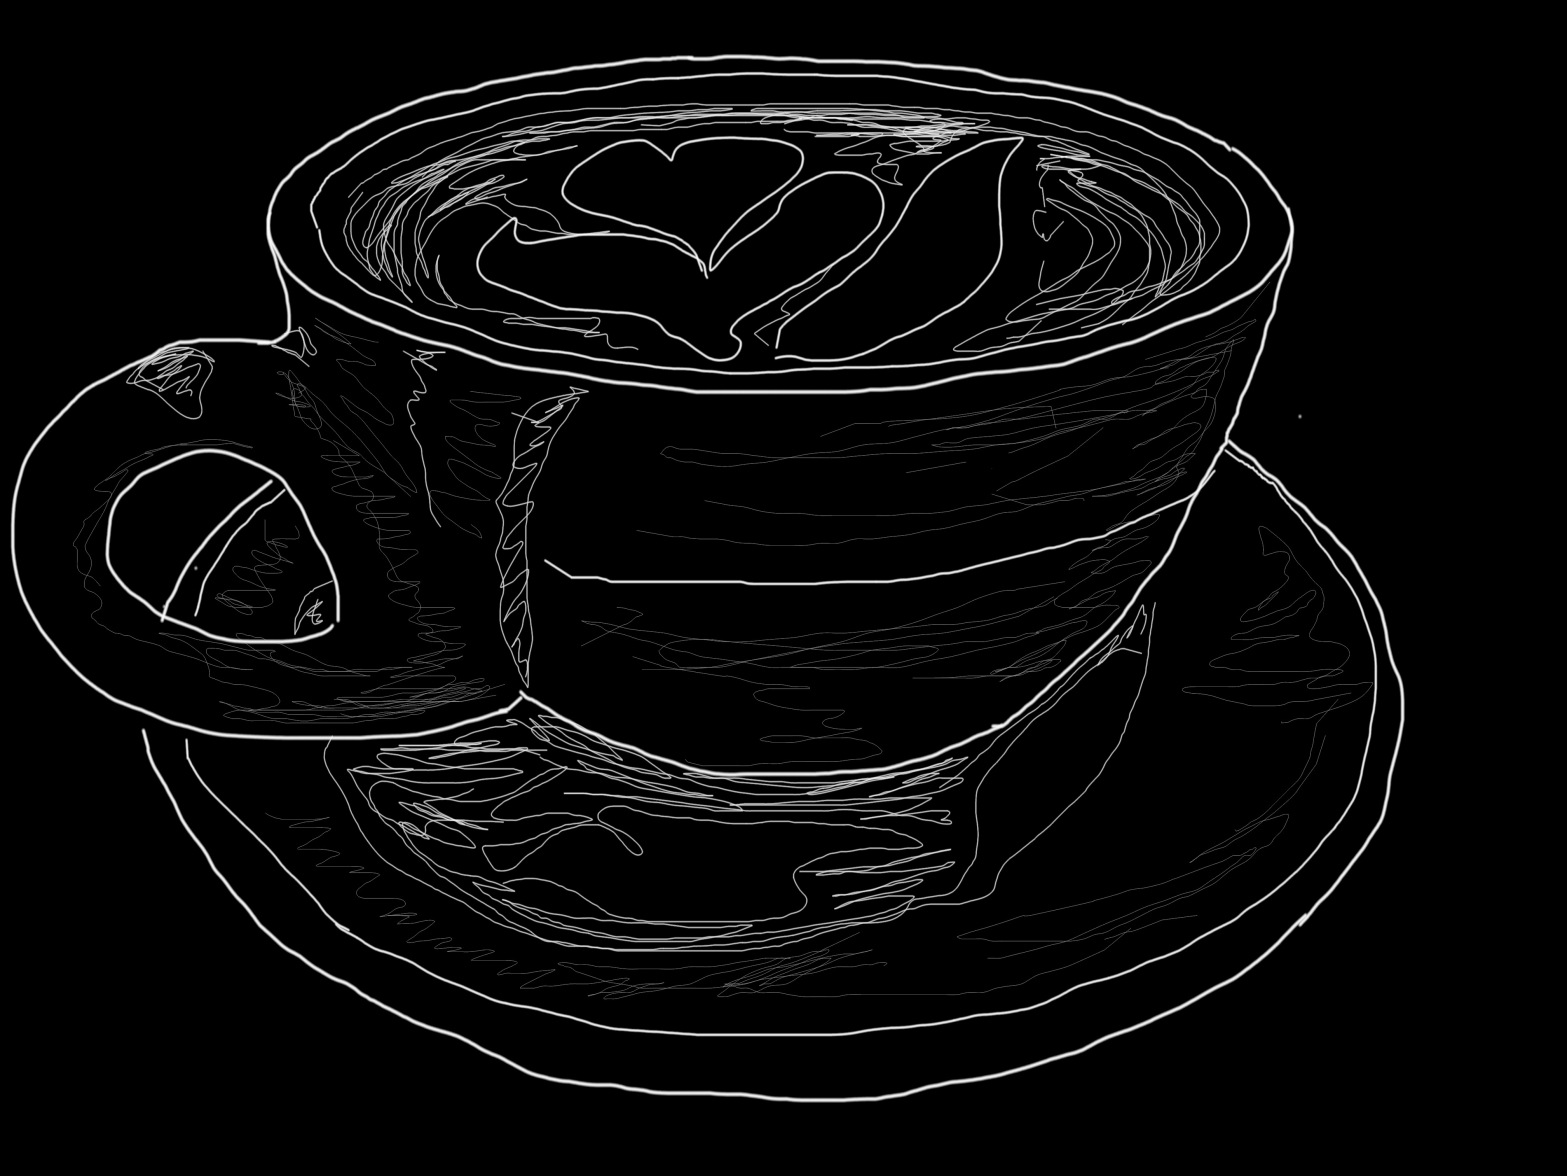 White line drawing on a black background of a cup that is overflowing